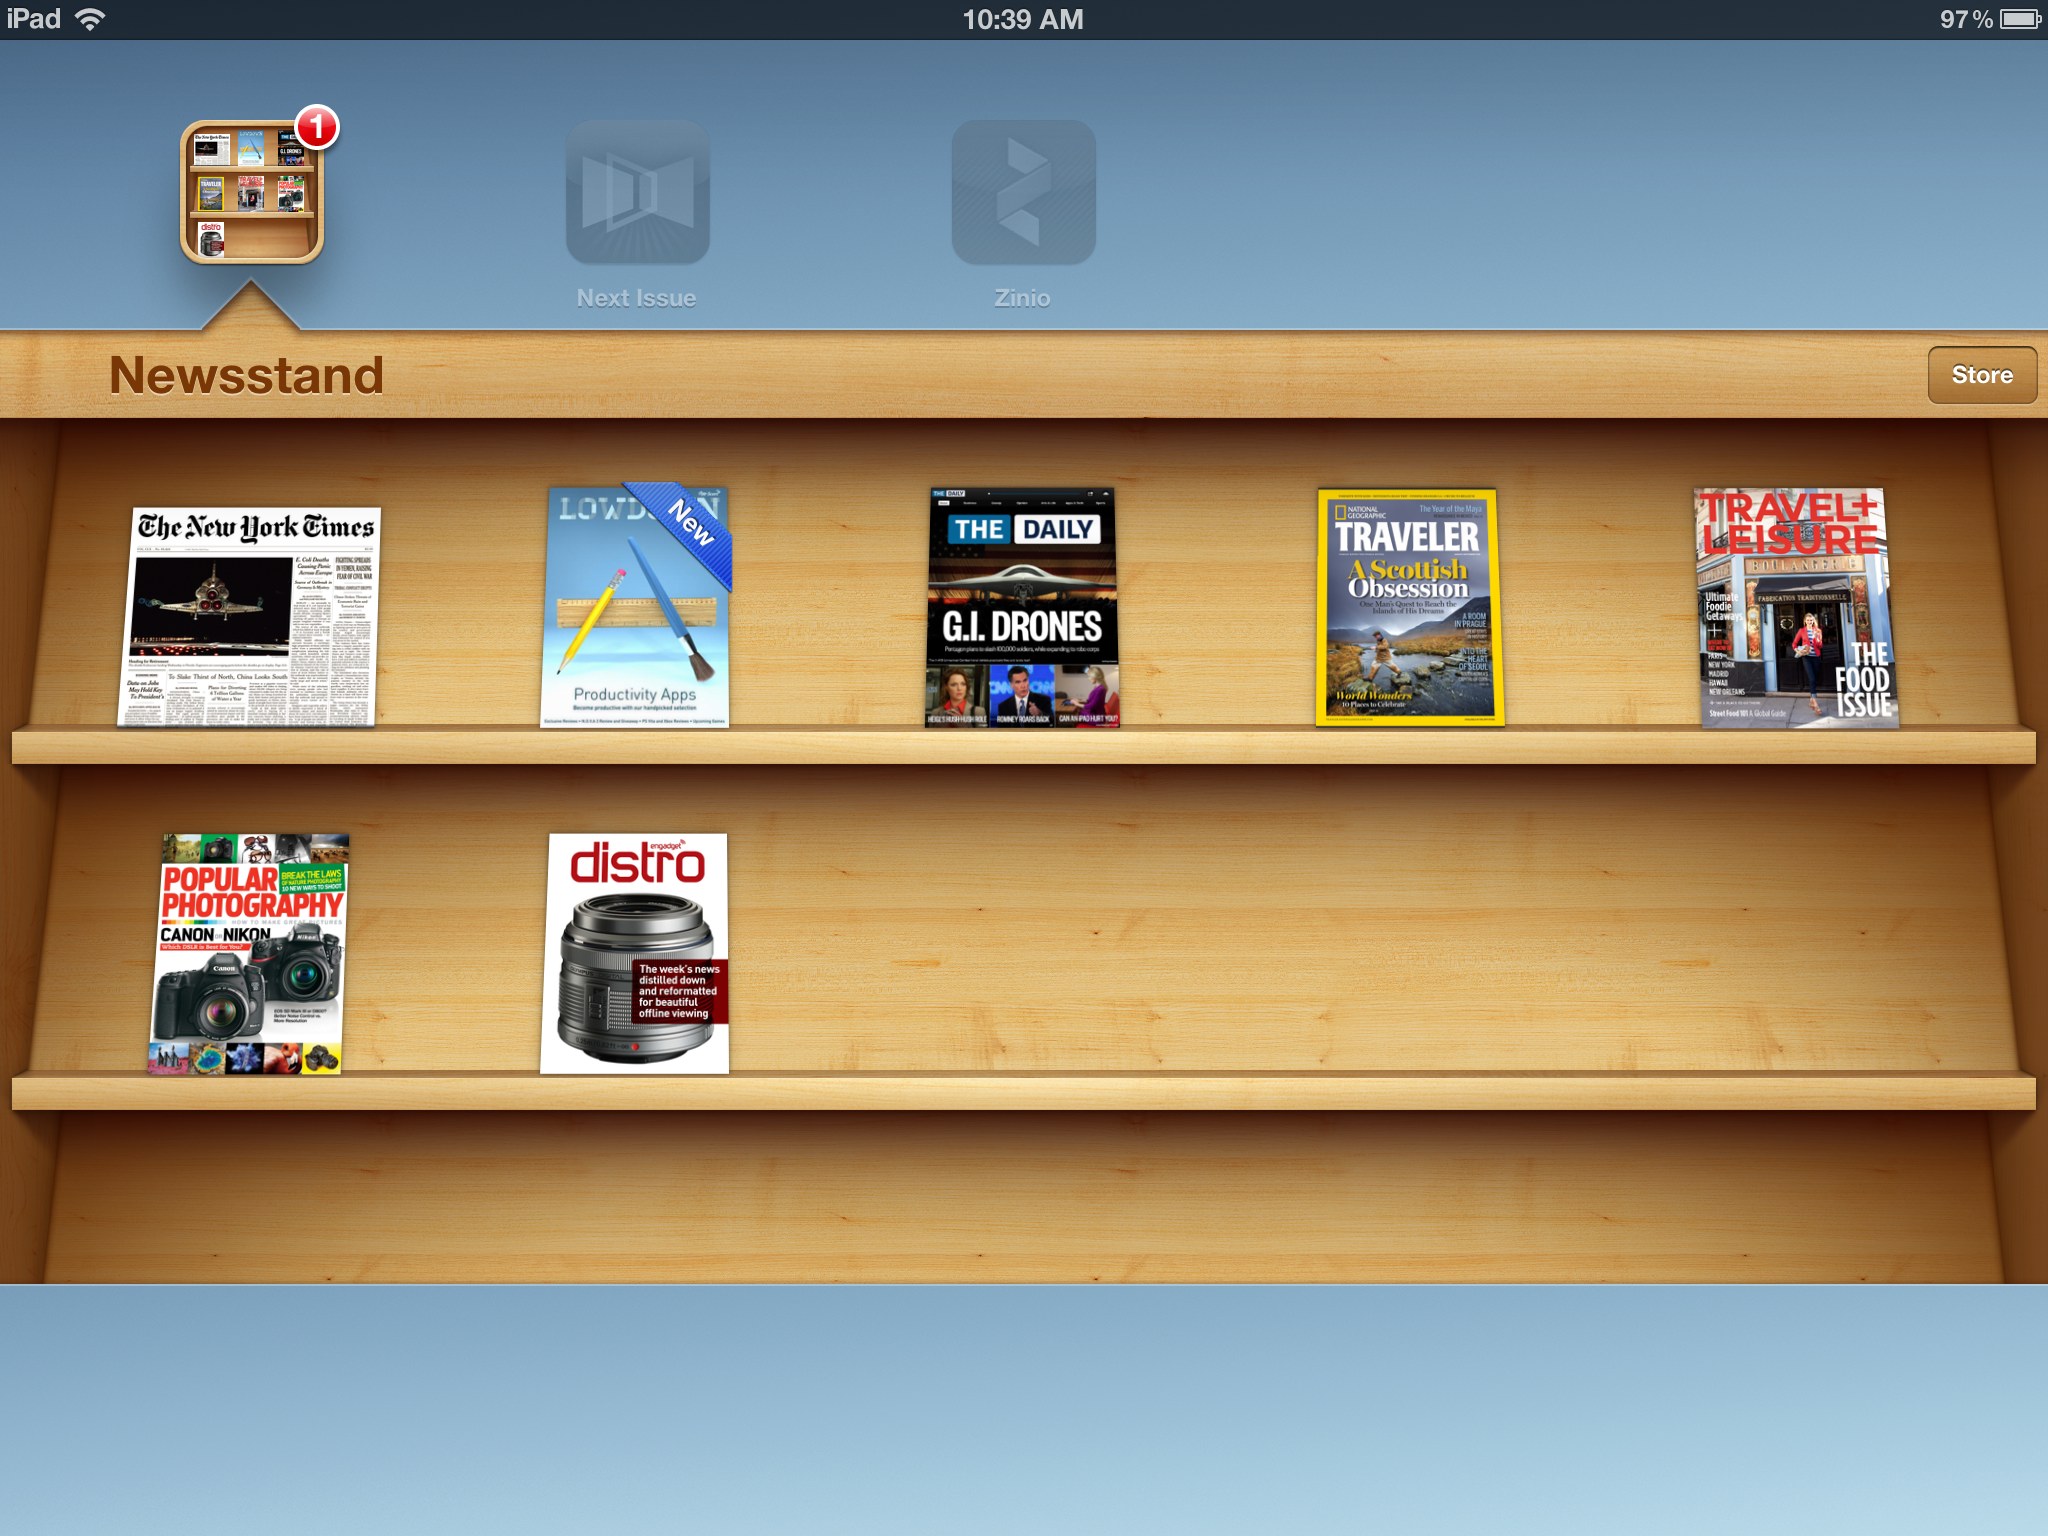 Newsstand for iPad user interface